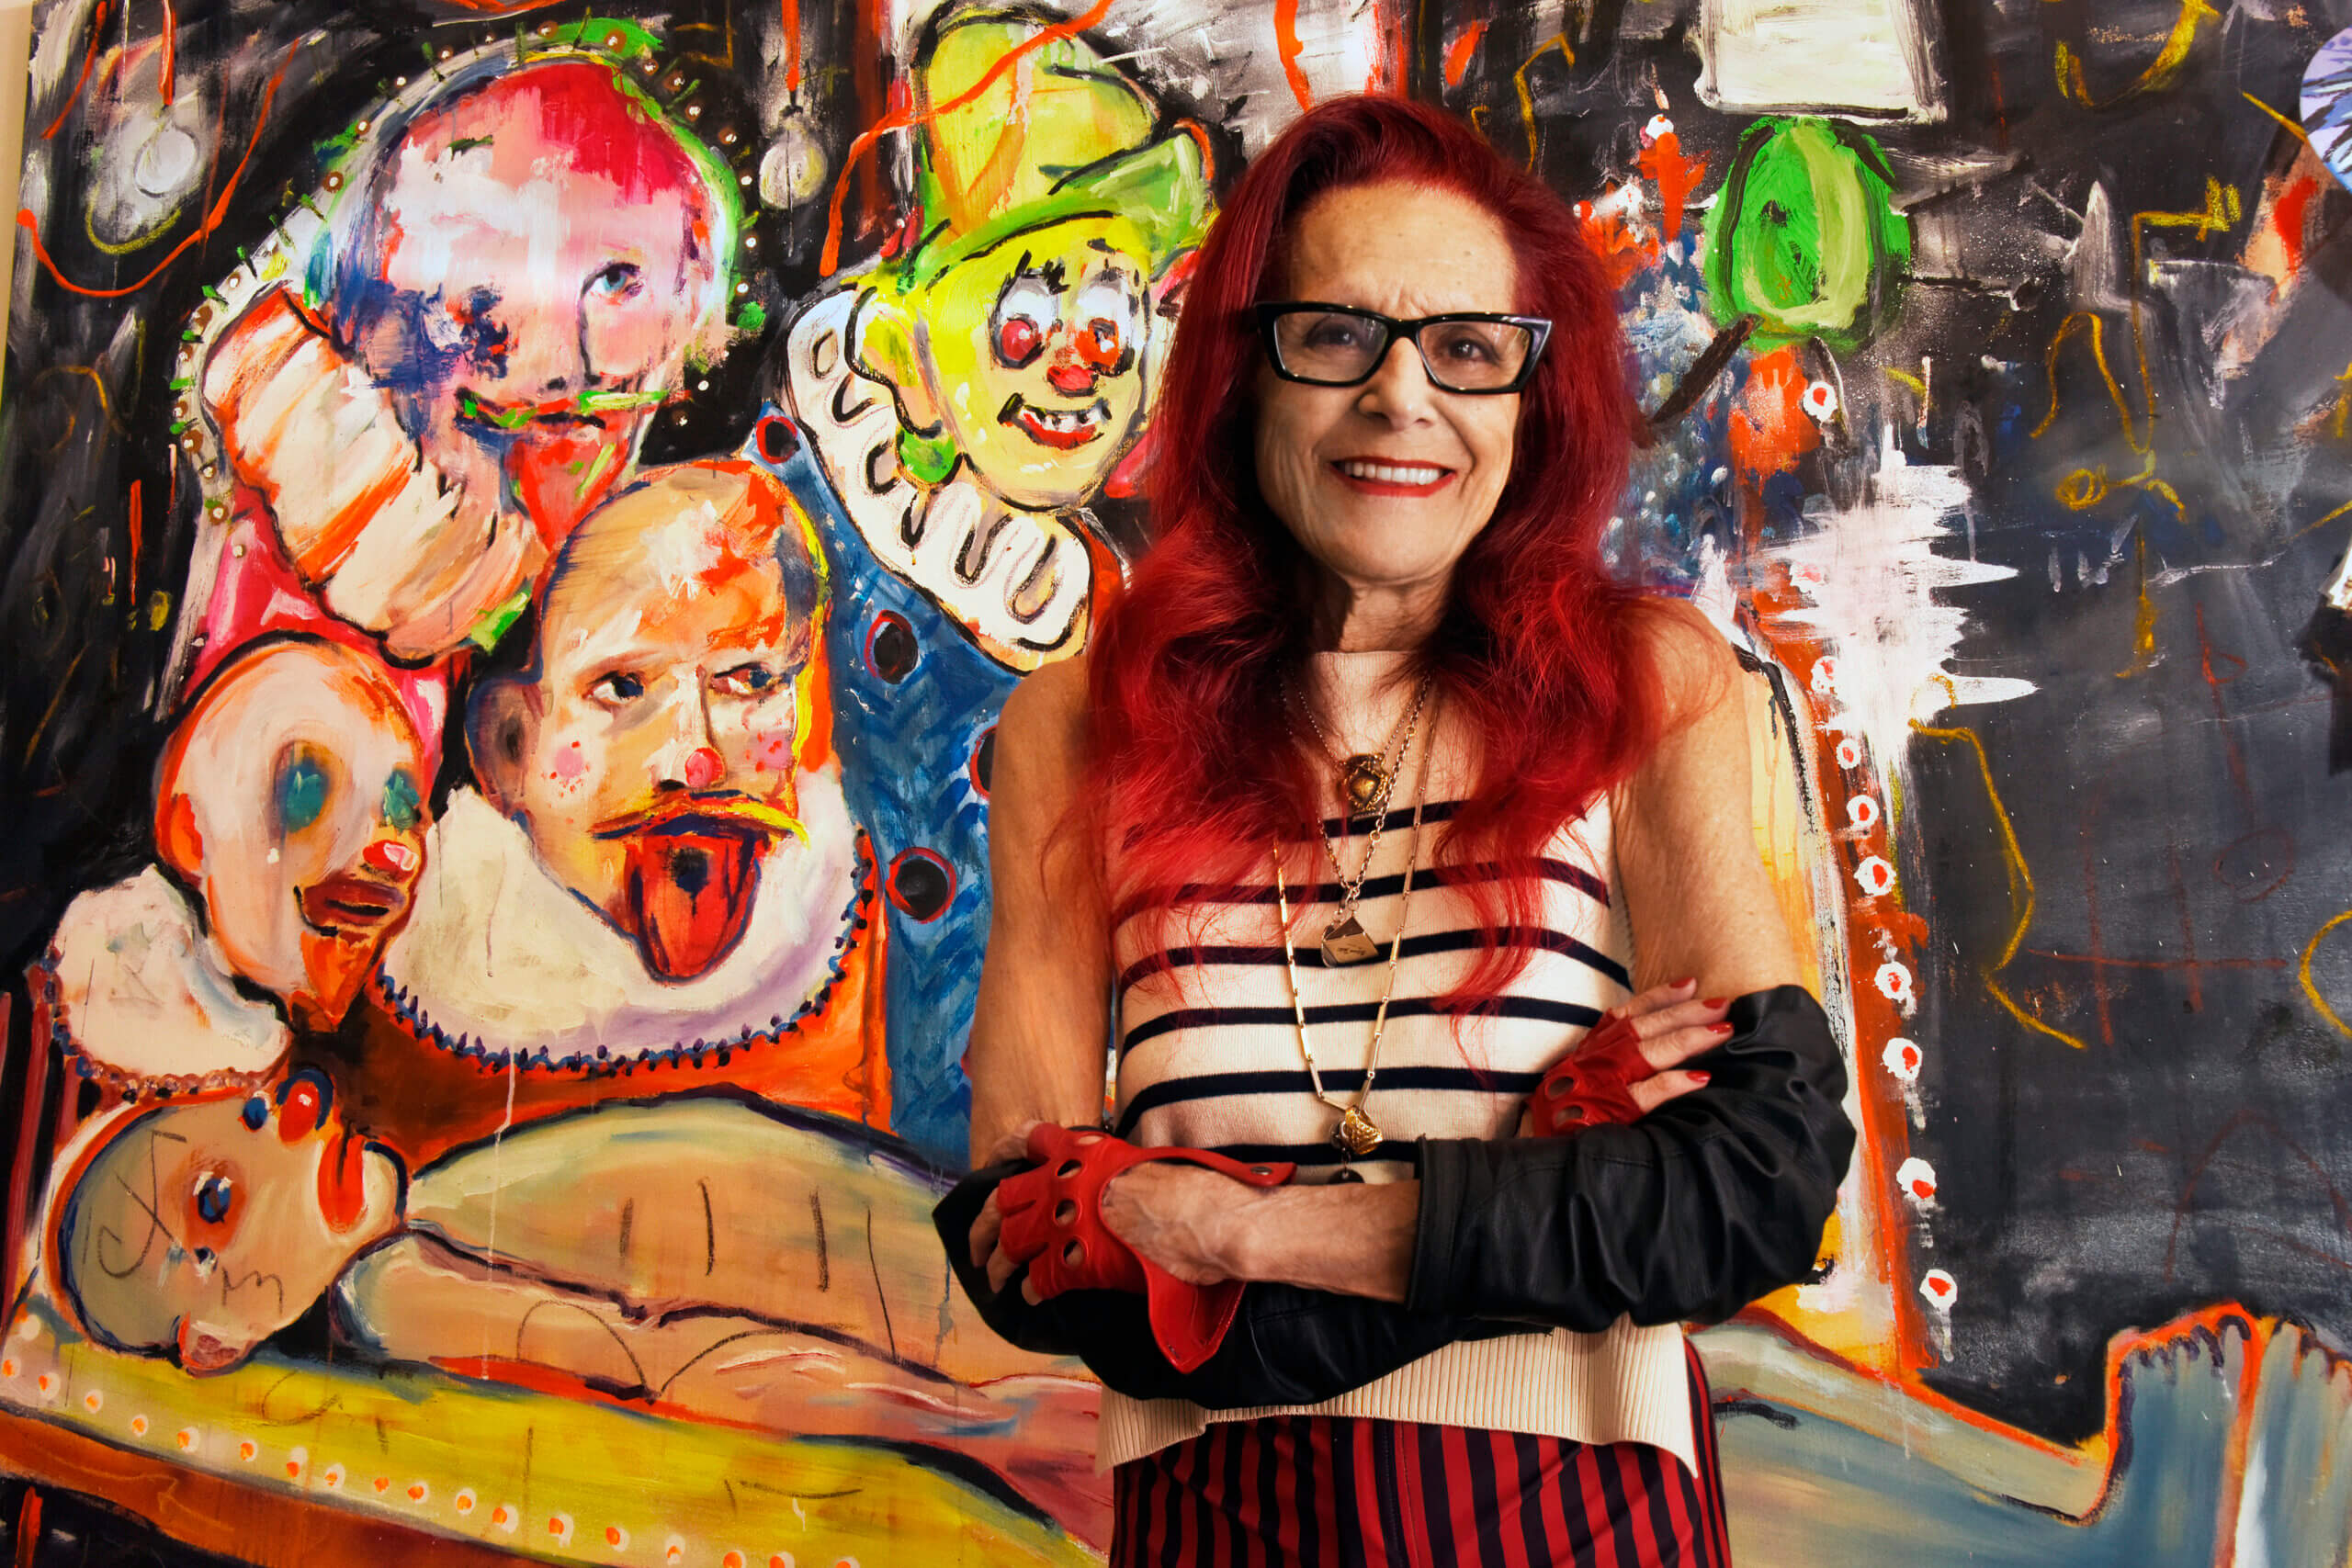 Patricia Field shares the stories behind her 'Emily in Paris' outfits